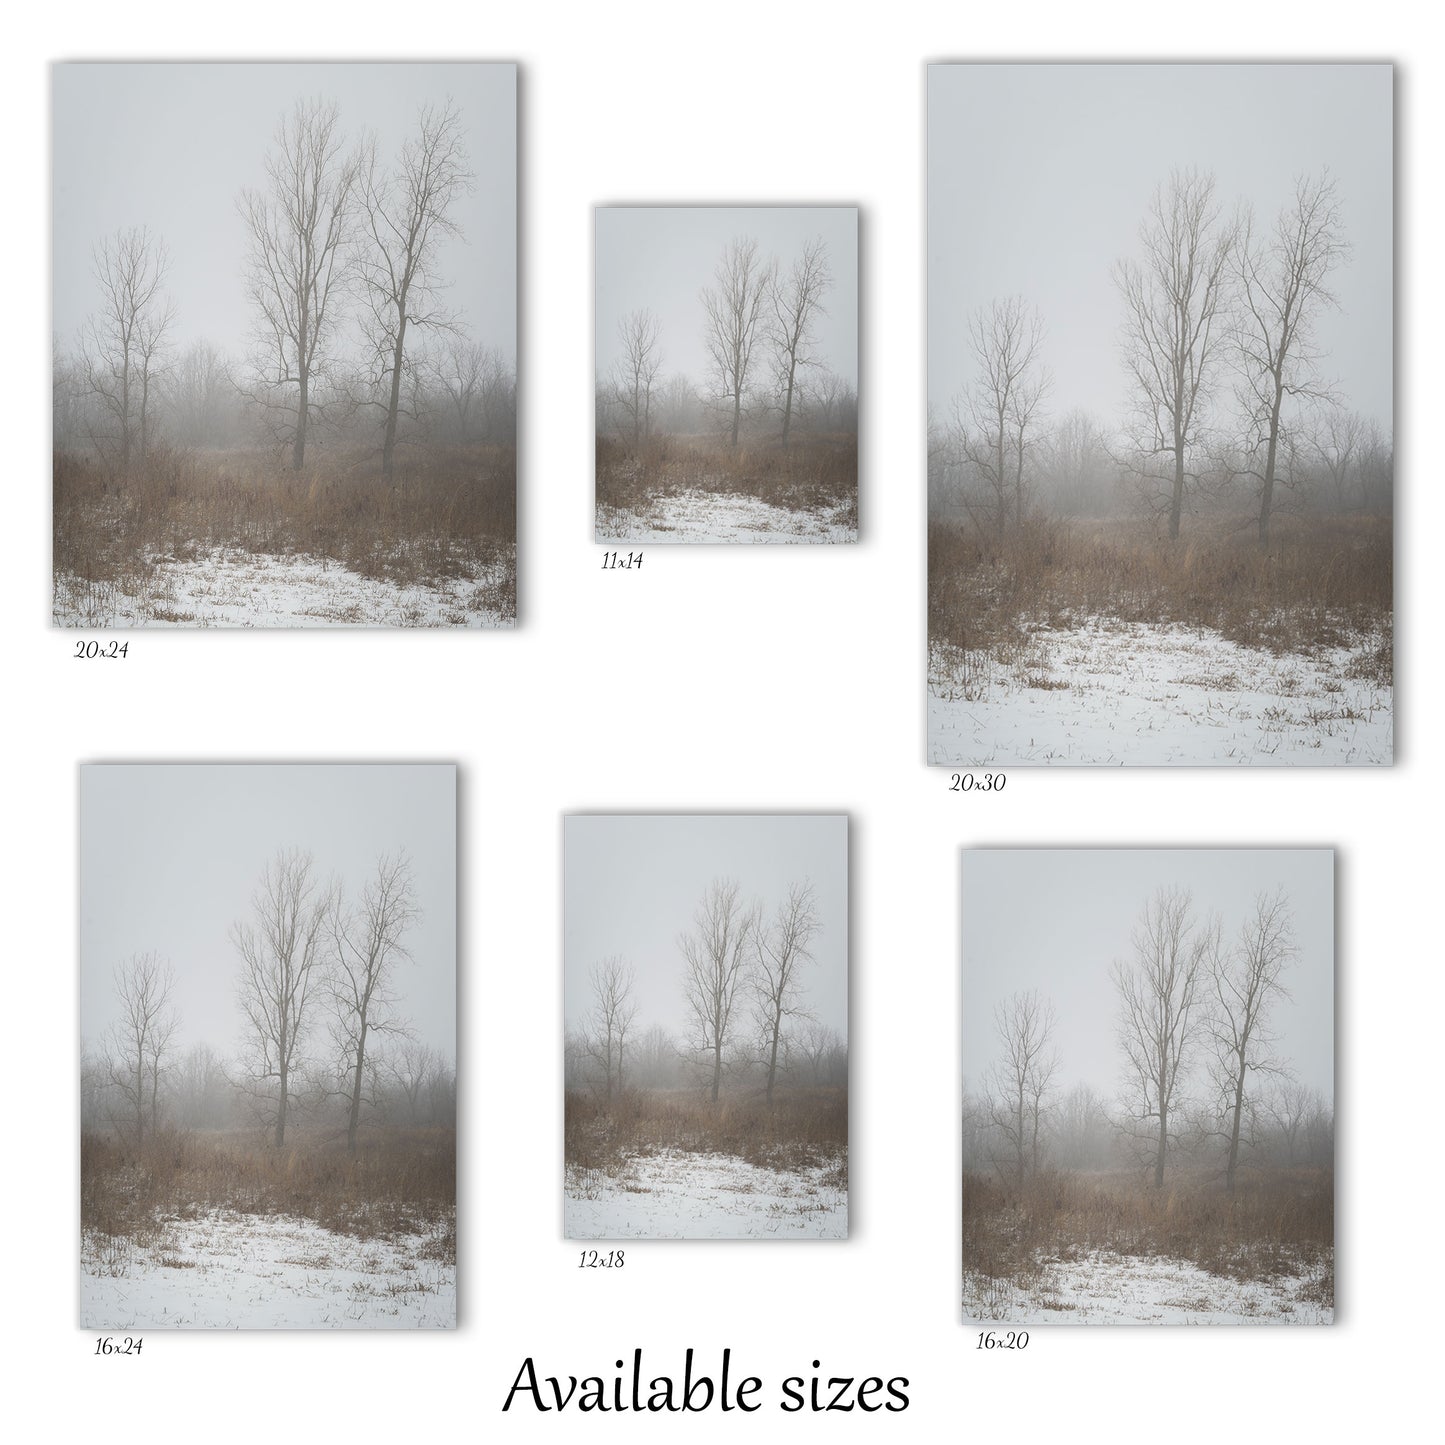 Visual representation of the winter canvas wall art print sizes available: 11x14, 12x18, 16x20, 16x24, 20x24 and 20x30.